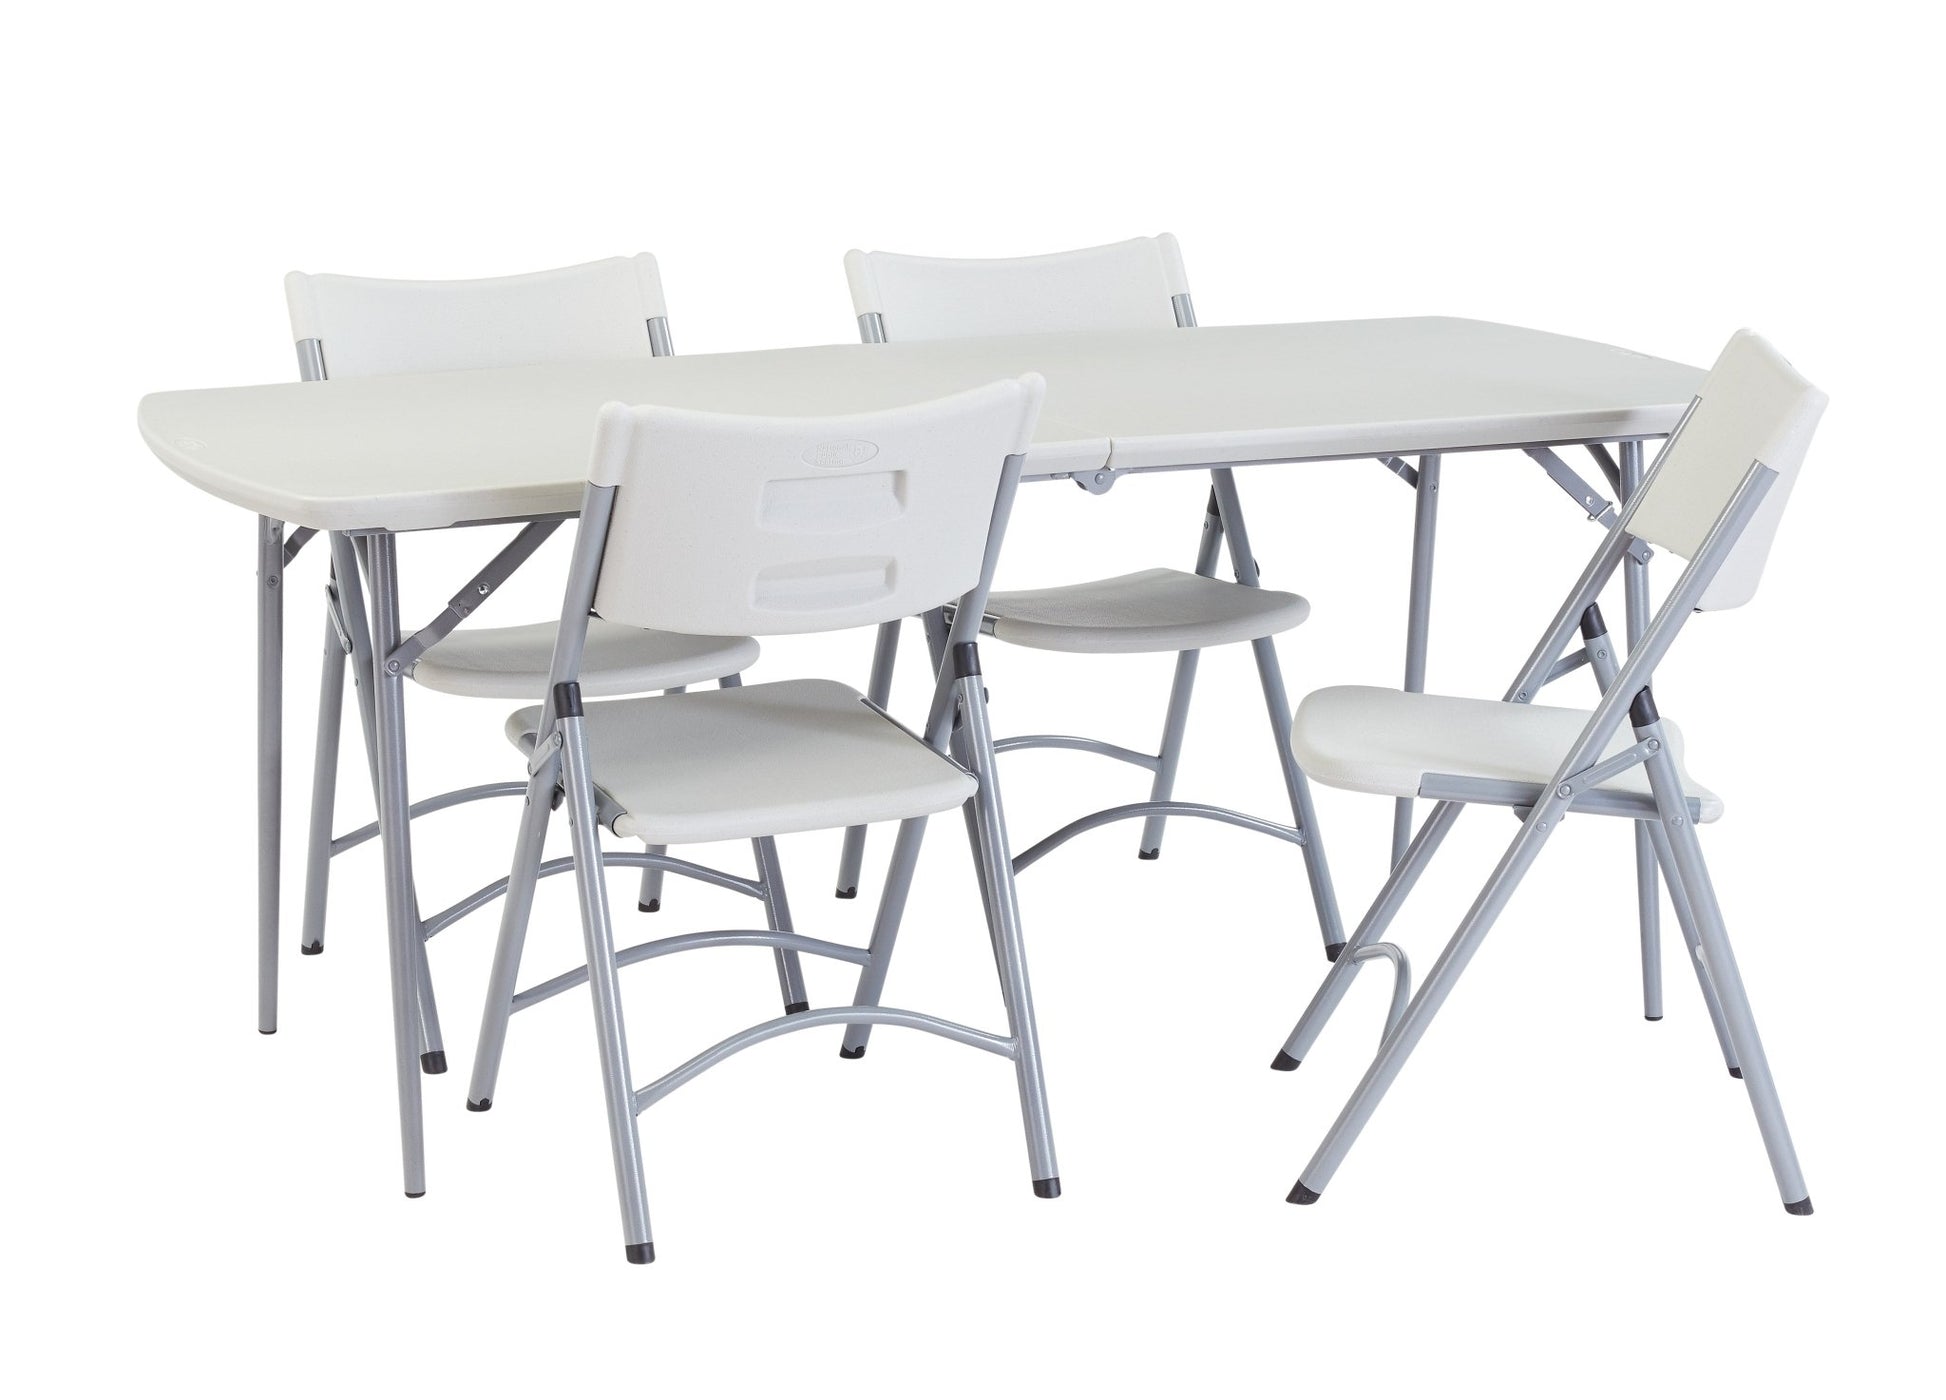 NPS Rectangular Fold-In-Half Table - 30"L x 72"W (National Public Seating NPS-BMFIH3072) - SchoolOutlet